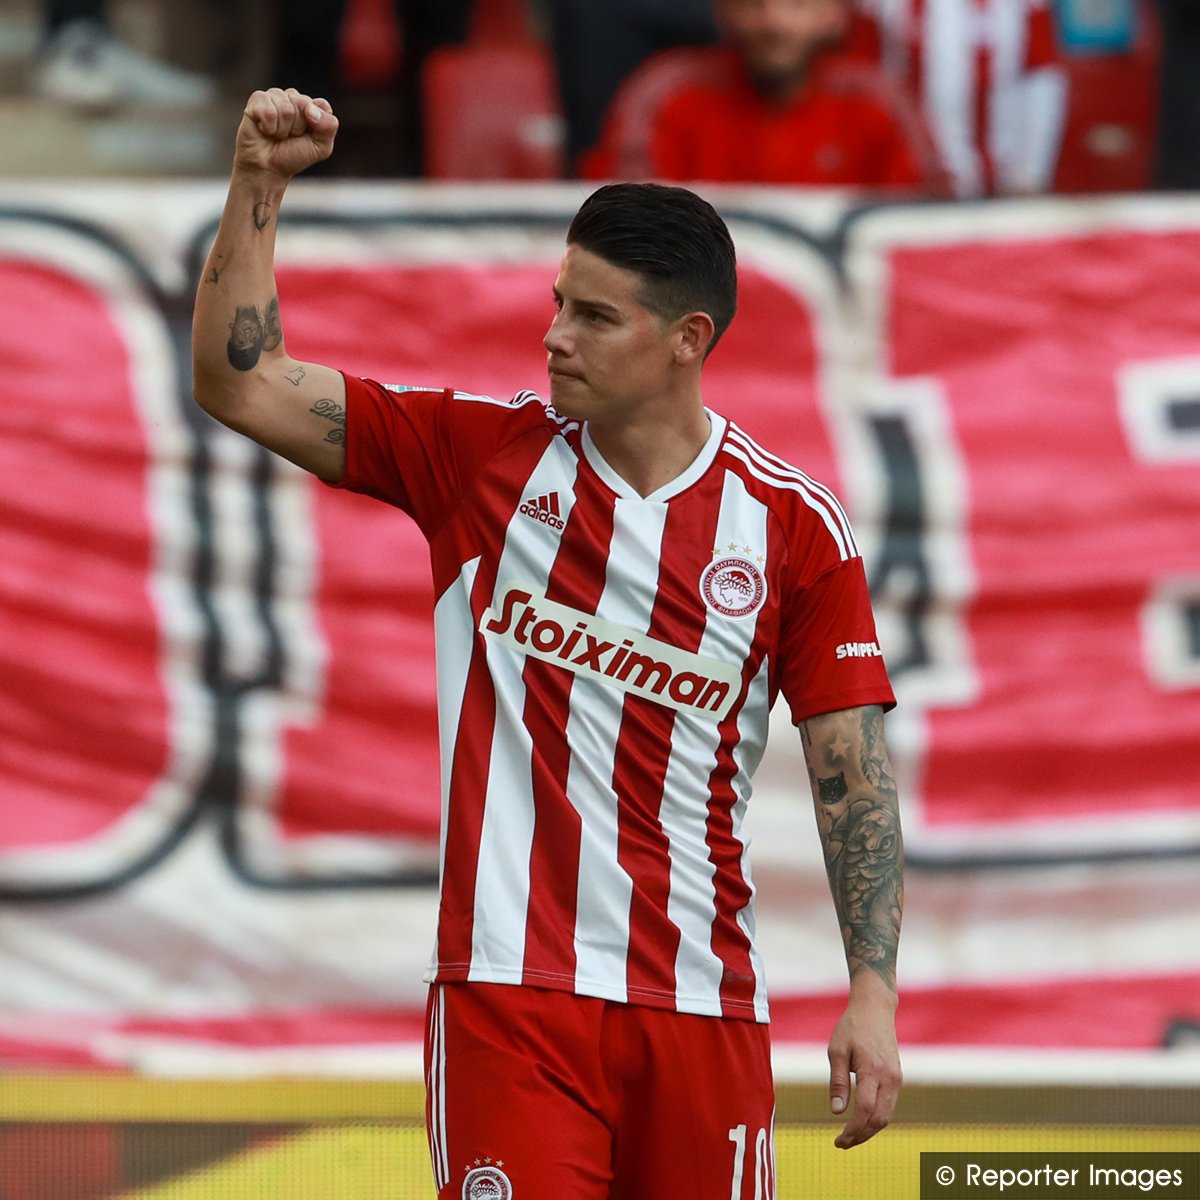 FT Olympiakos 2-0 Lamia The Greek champions recover from their midweek exit from Europe with a comfortable victory over Lamia! Goals from James Rodriguez & Cédric Bakambu in the 1st half saw off the away side. With this win Thrylos climb to 3rd in the #slgr table